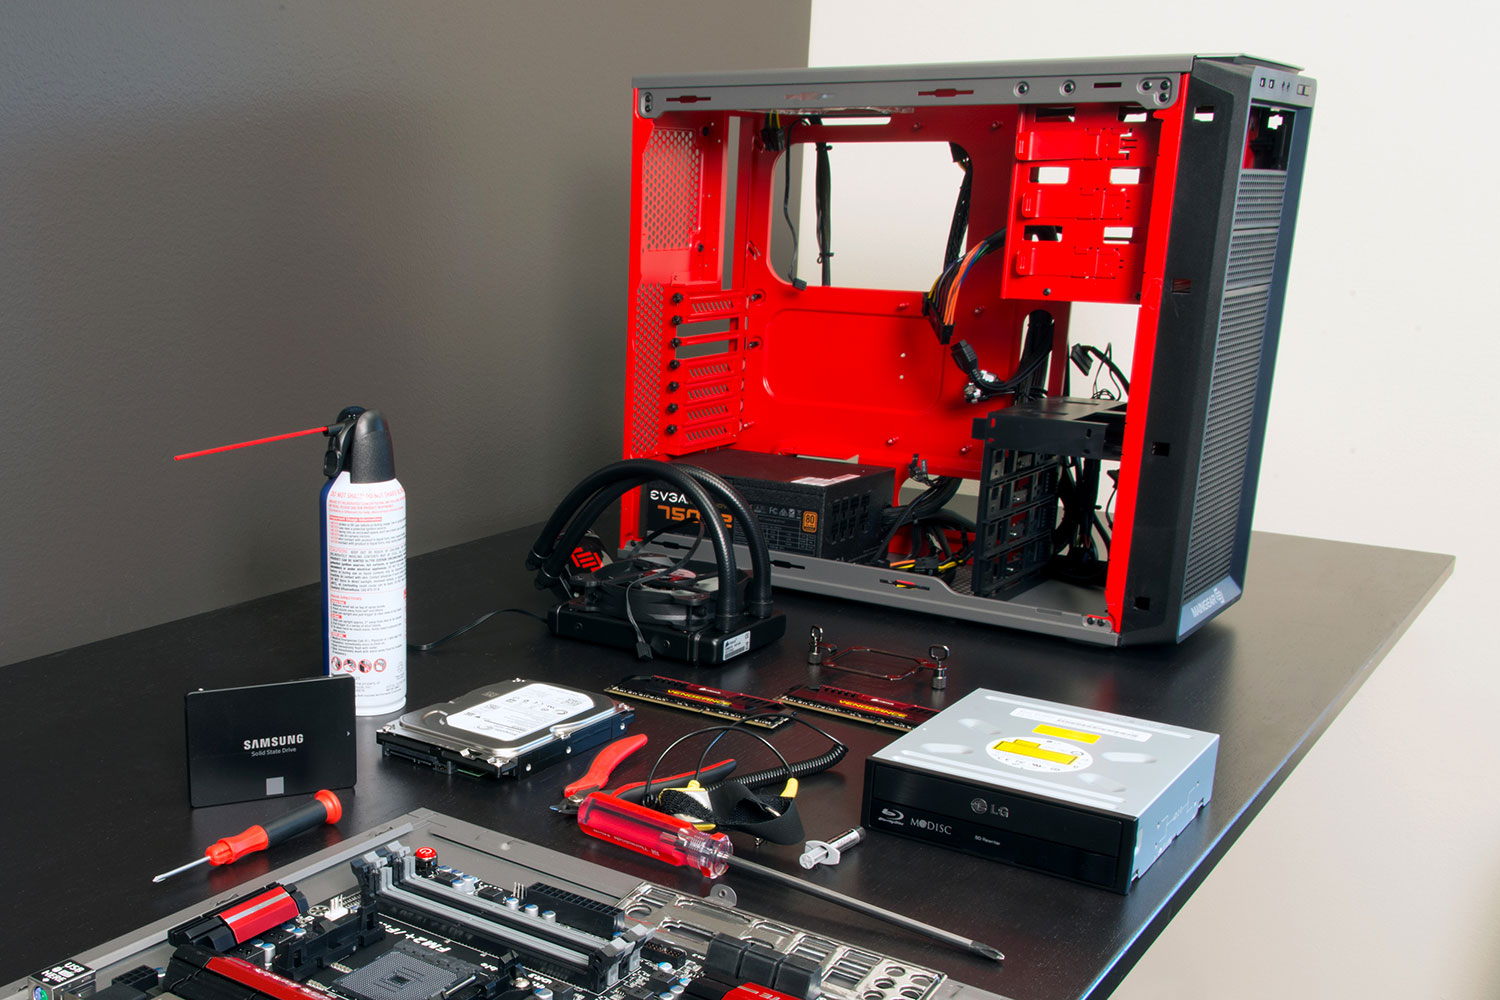 The Best 500 Pc Gaming Build Digital Trends